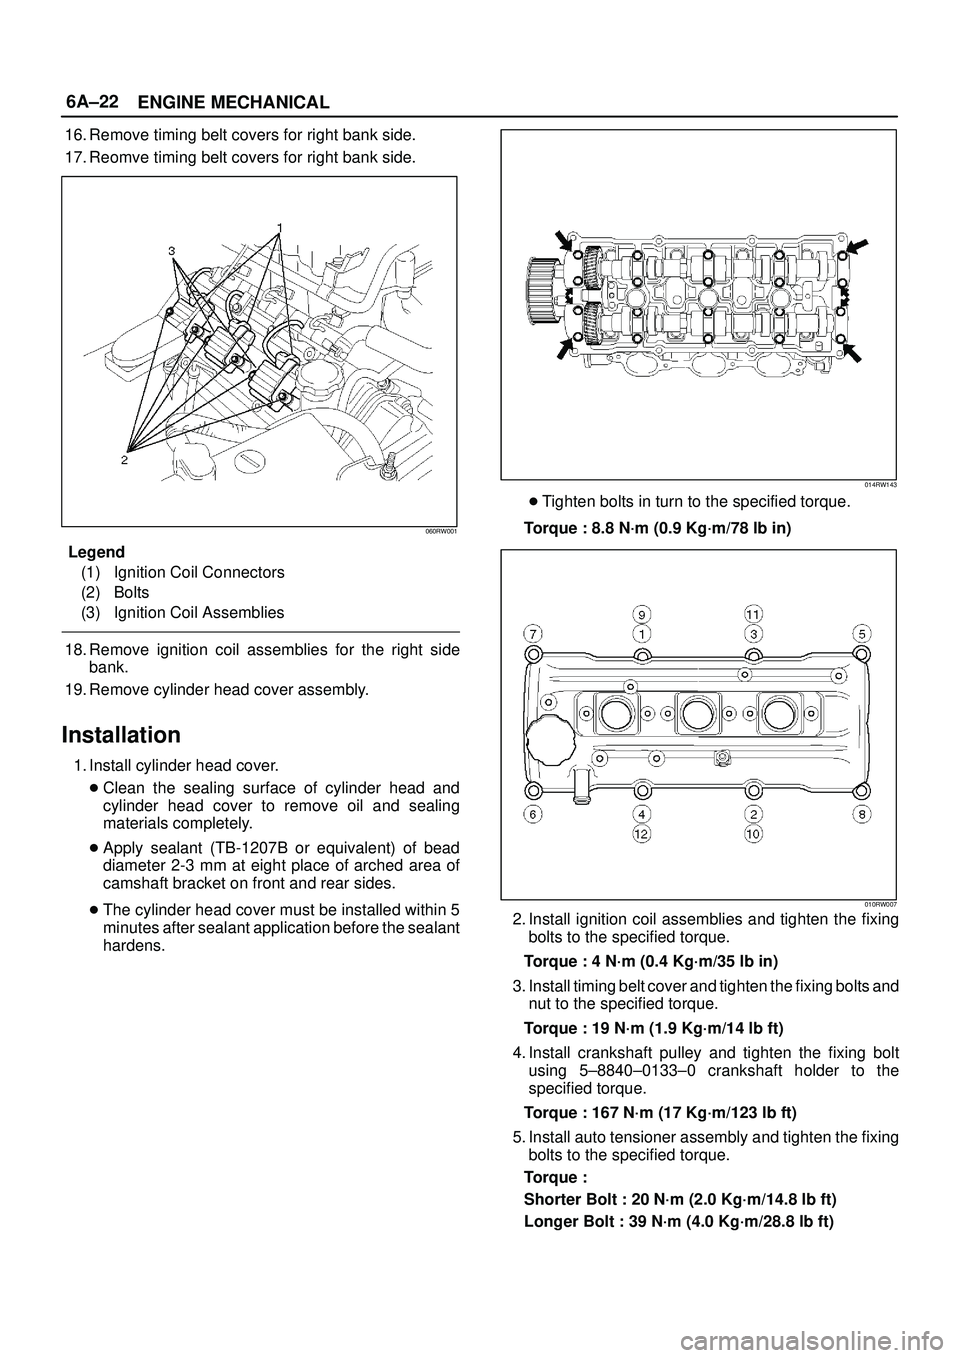 ISUZU TROOPER 1998  Service Repair Manual 6A±22
ENGINE MECHANICAL
16. Remove timing belt covers for right bank side.
17. Reomve timing belt covers for right bank side.
060RW001
Legend
(1) Ignition Coil Connectors
(2) Bolts
(3) Ignition Coil 